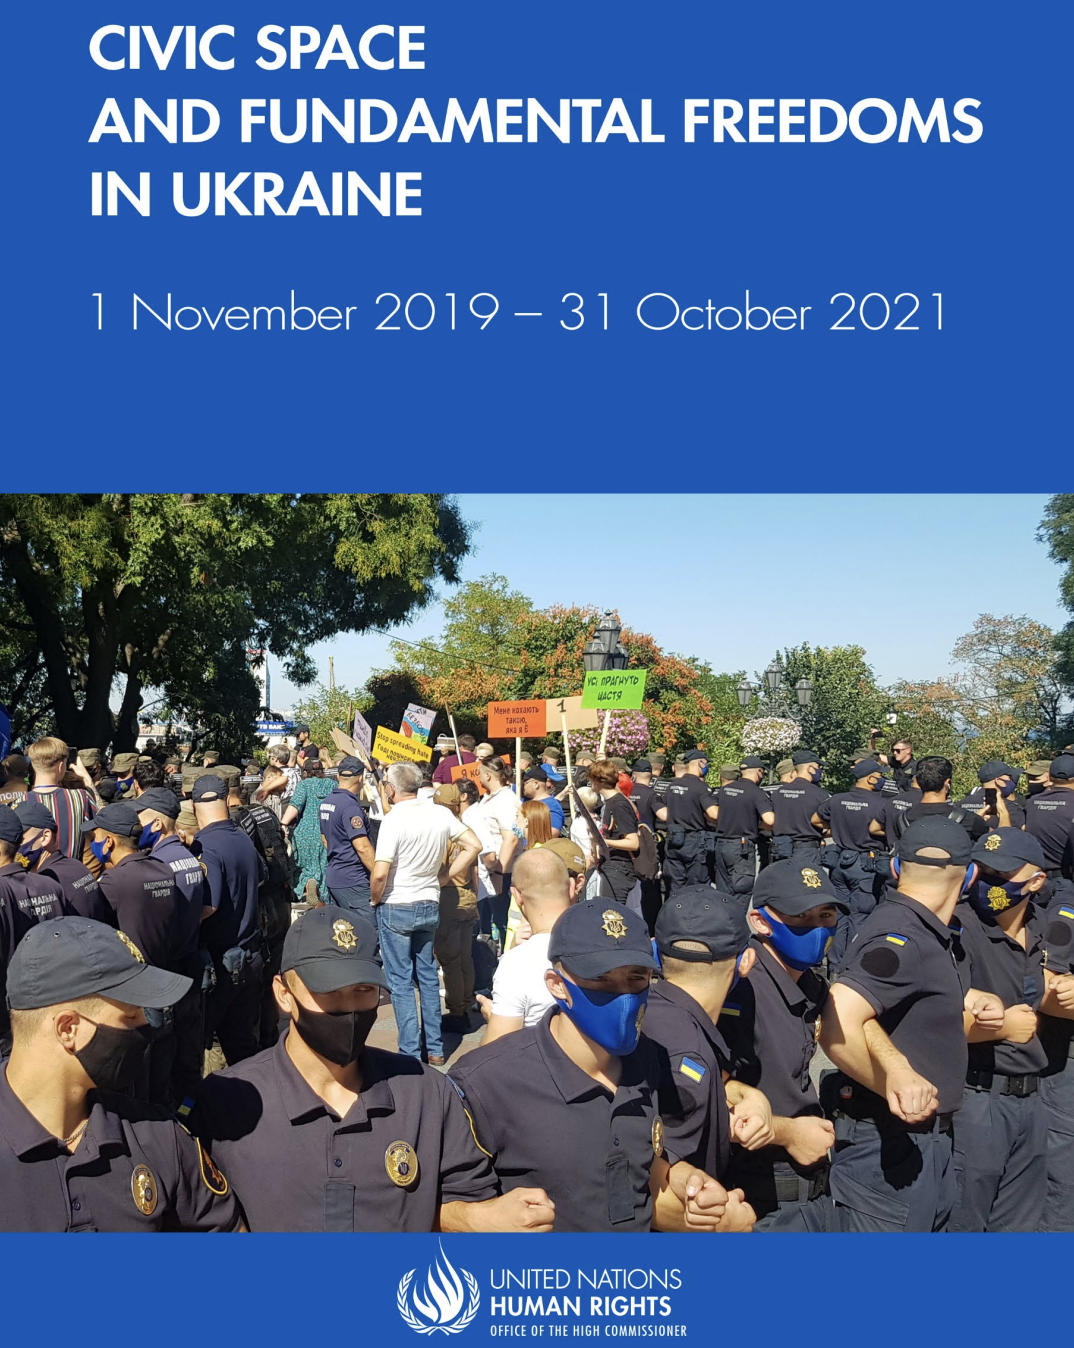 Civic space and fundamental freedoms in Ukraine